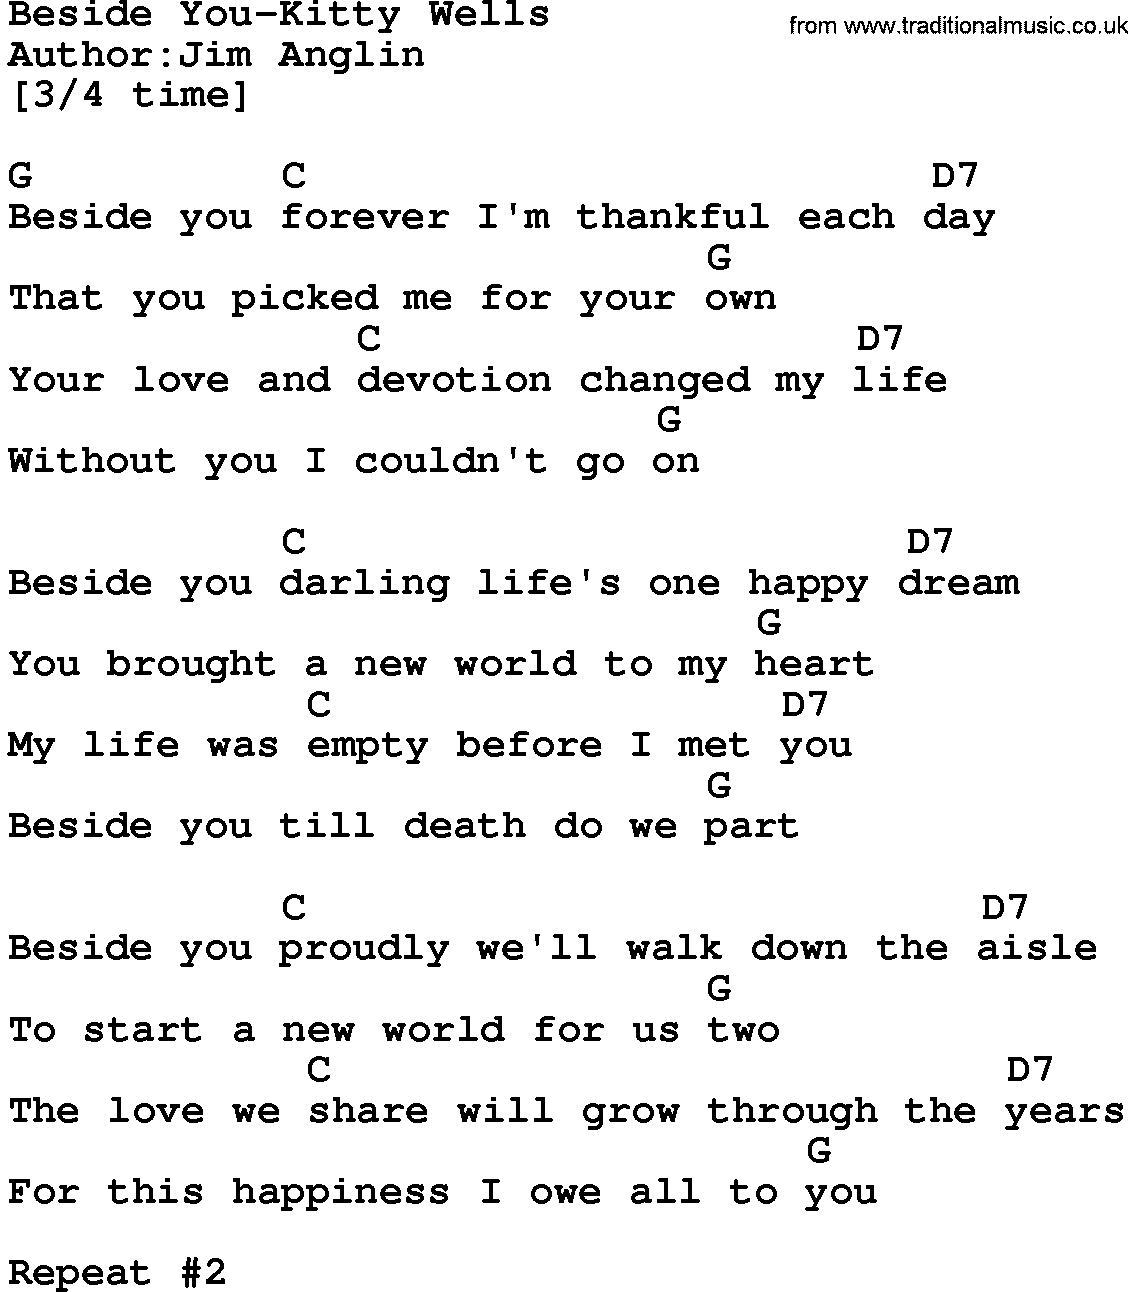 Country music song: Beside You-Kitty Wells lyrics and chords